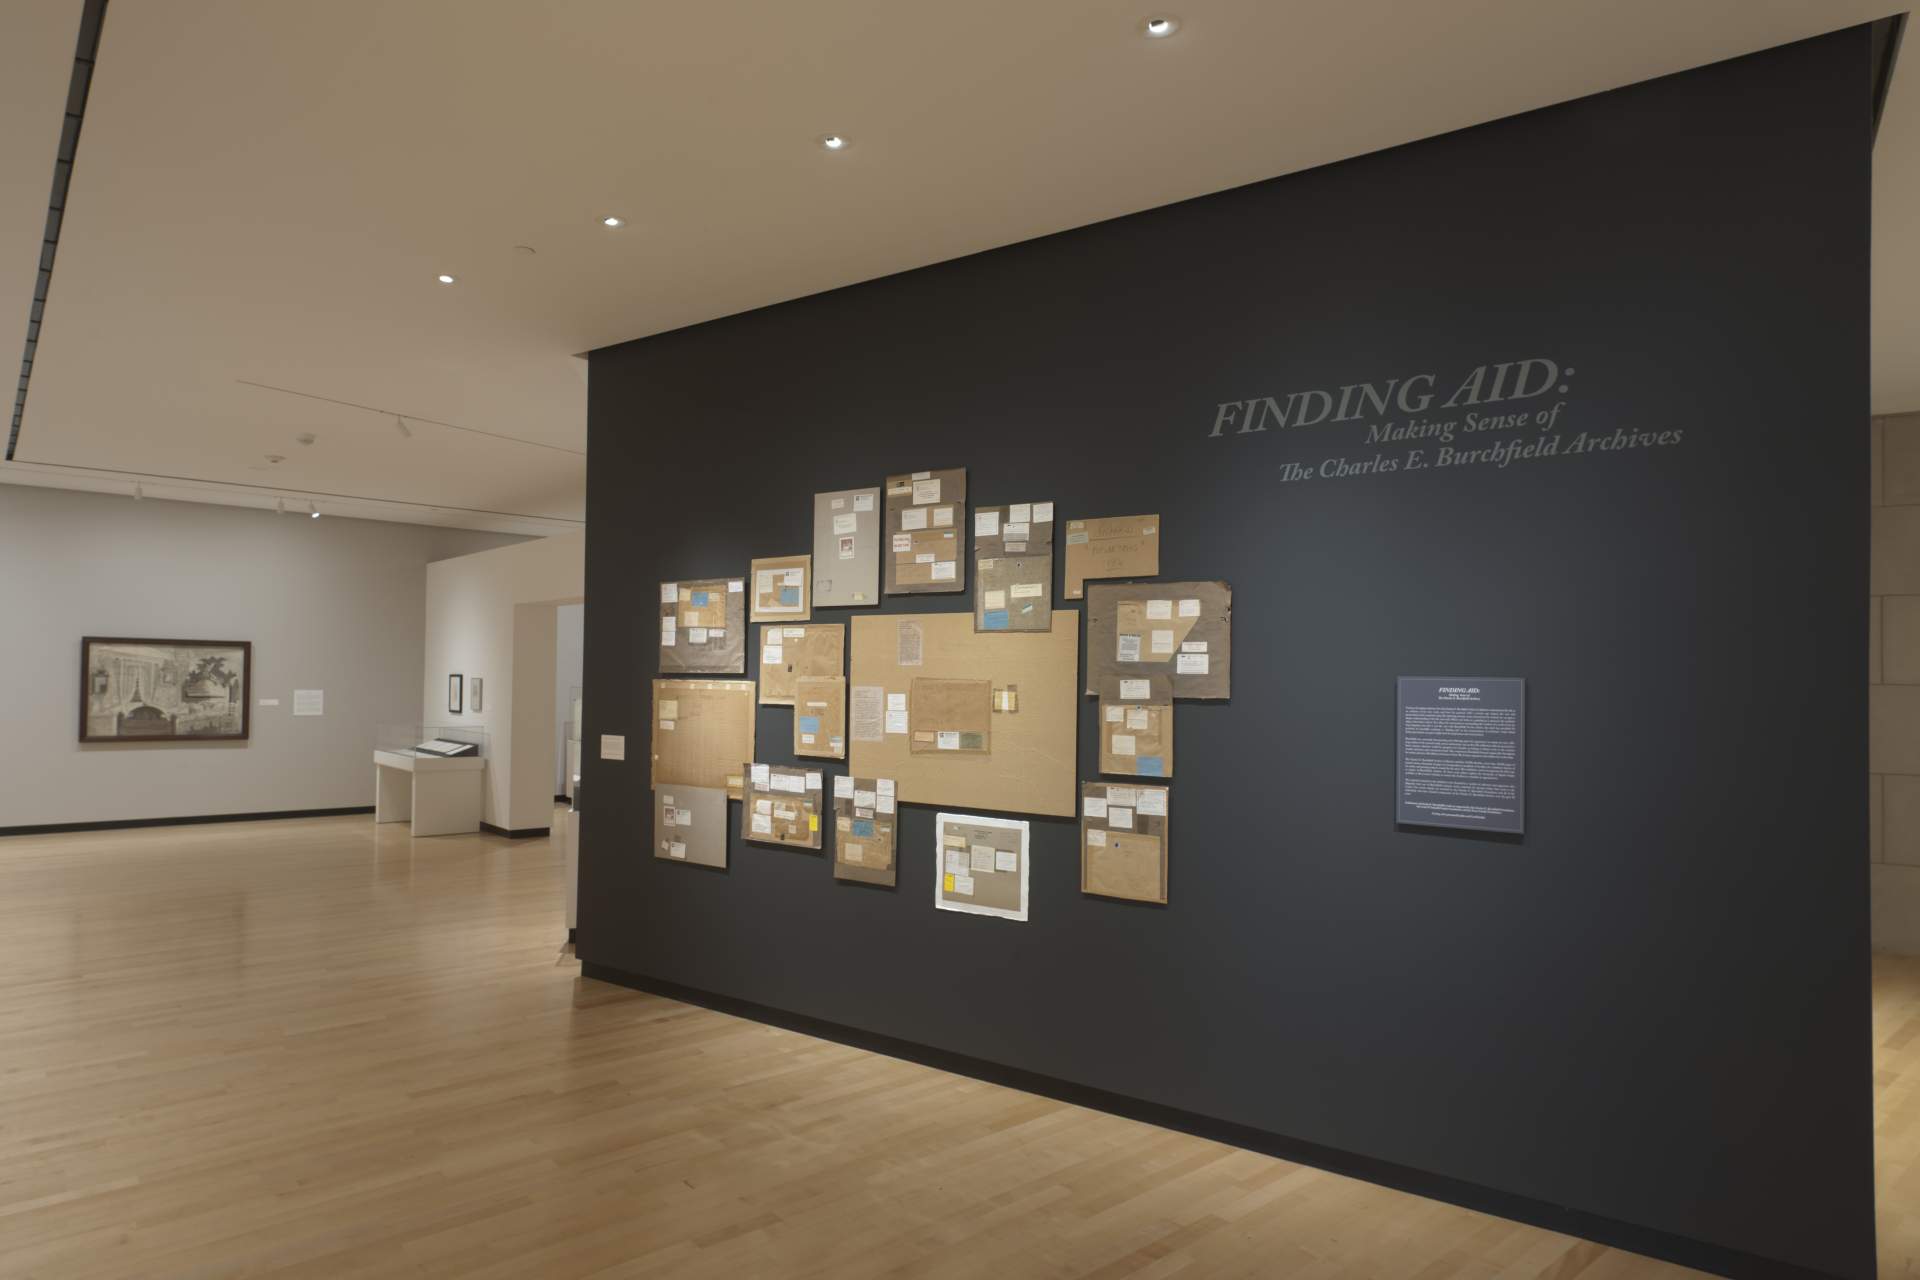 Installation image for Finding Aid